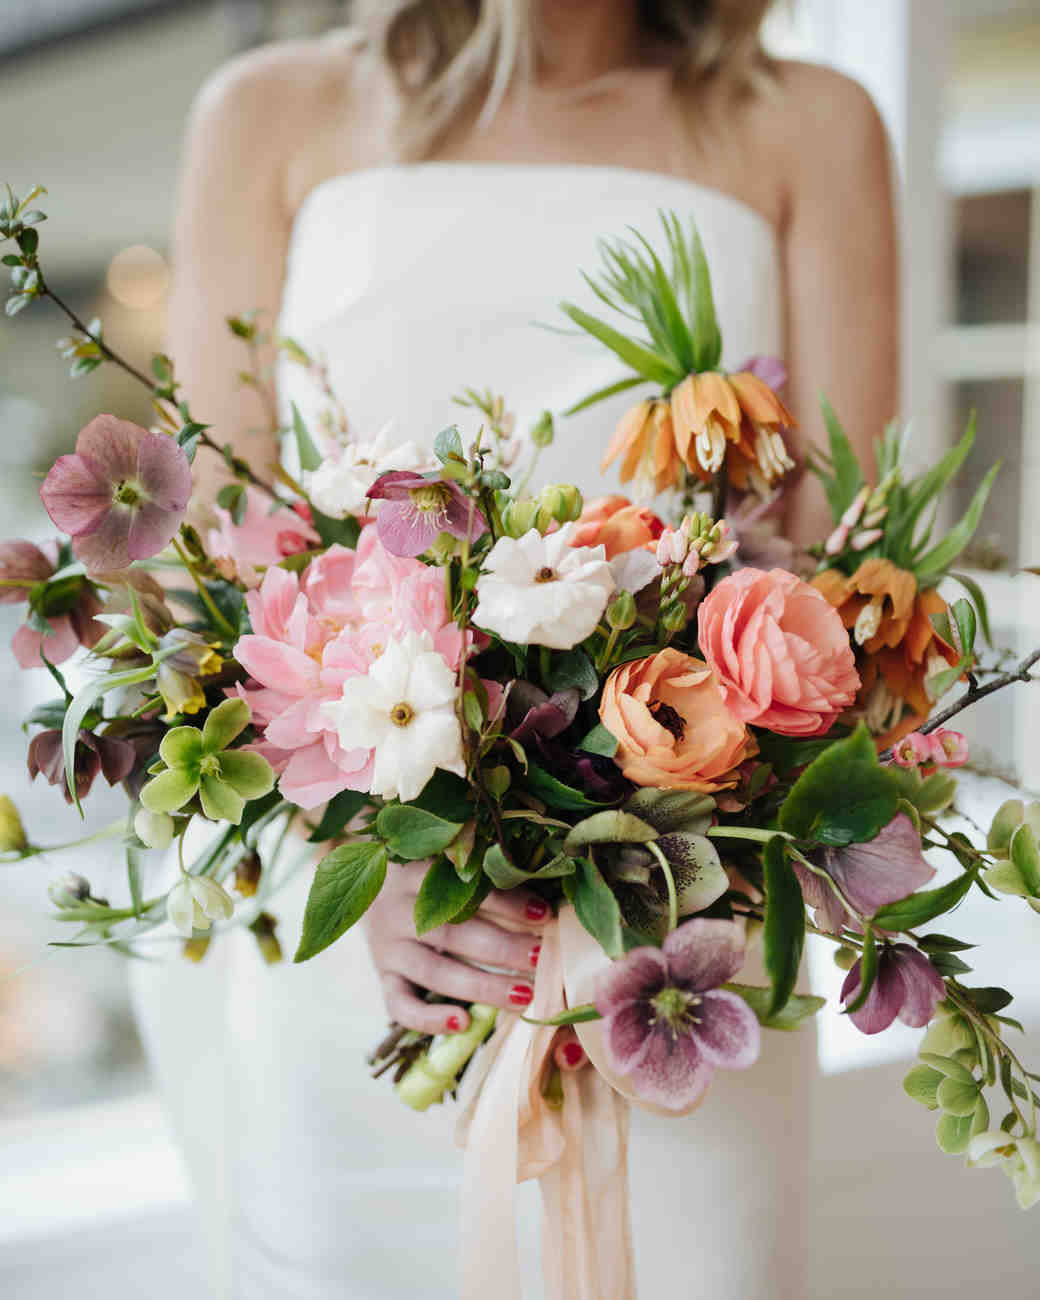 Spring Wedding Flowers
 52 Ideas for Your Spring Wedding Bouquet